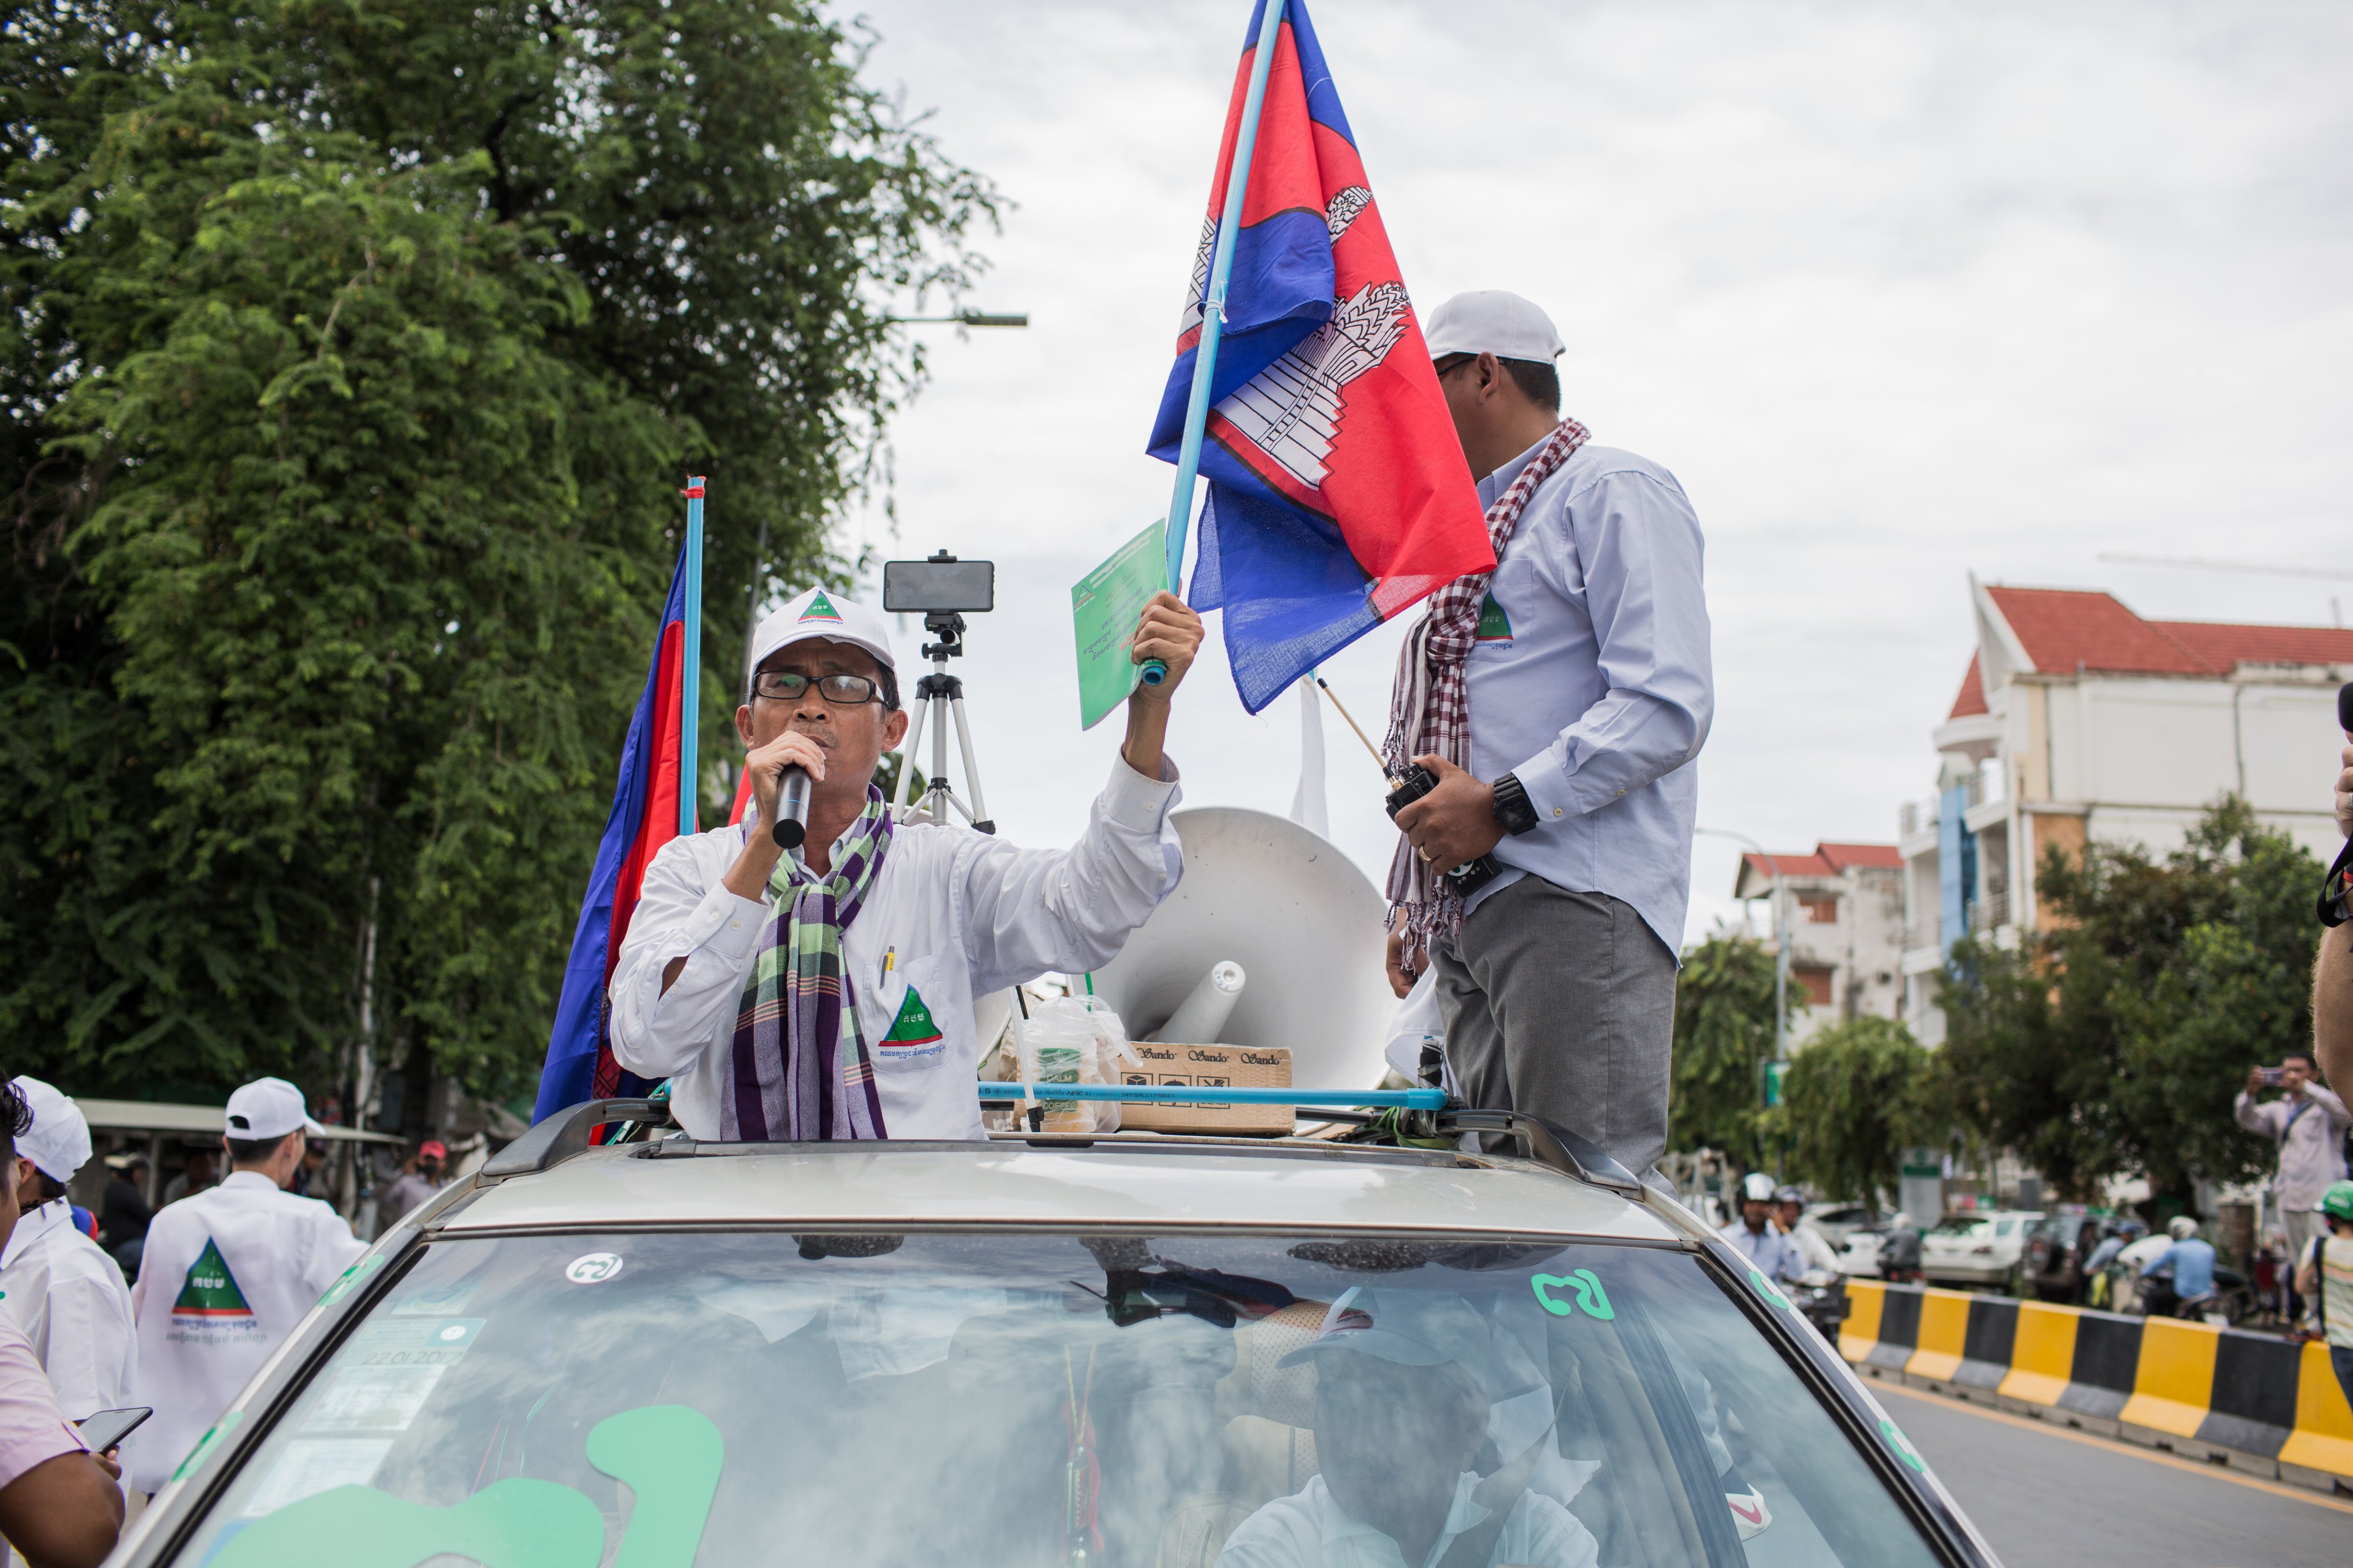 Yang Saing Koma, a candidate for the
                      Grassroots Democratic Party in Phnom Penh on July 10, 2018. (Enric Catala Contreras&mdash;SOPA Images/LightRocket/Getty Images)